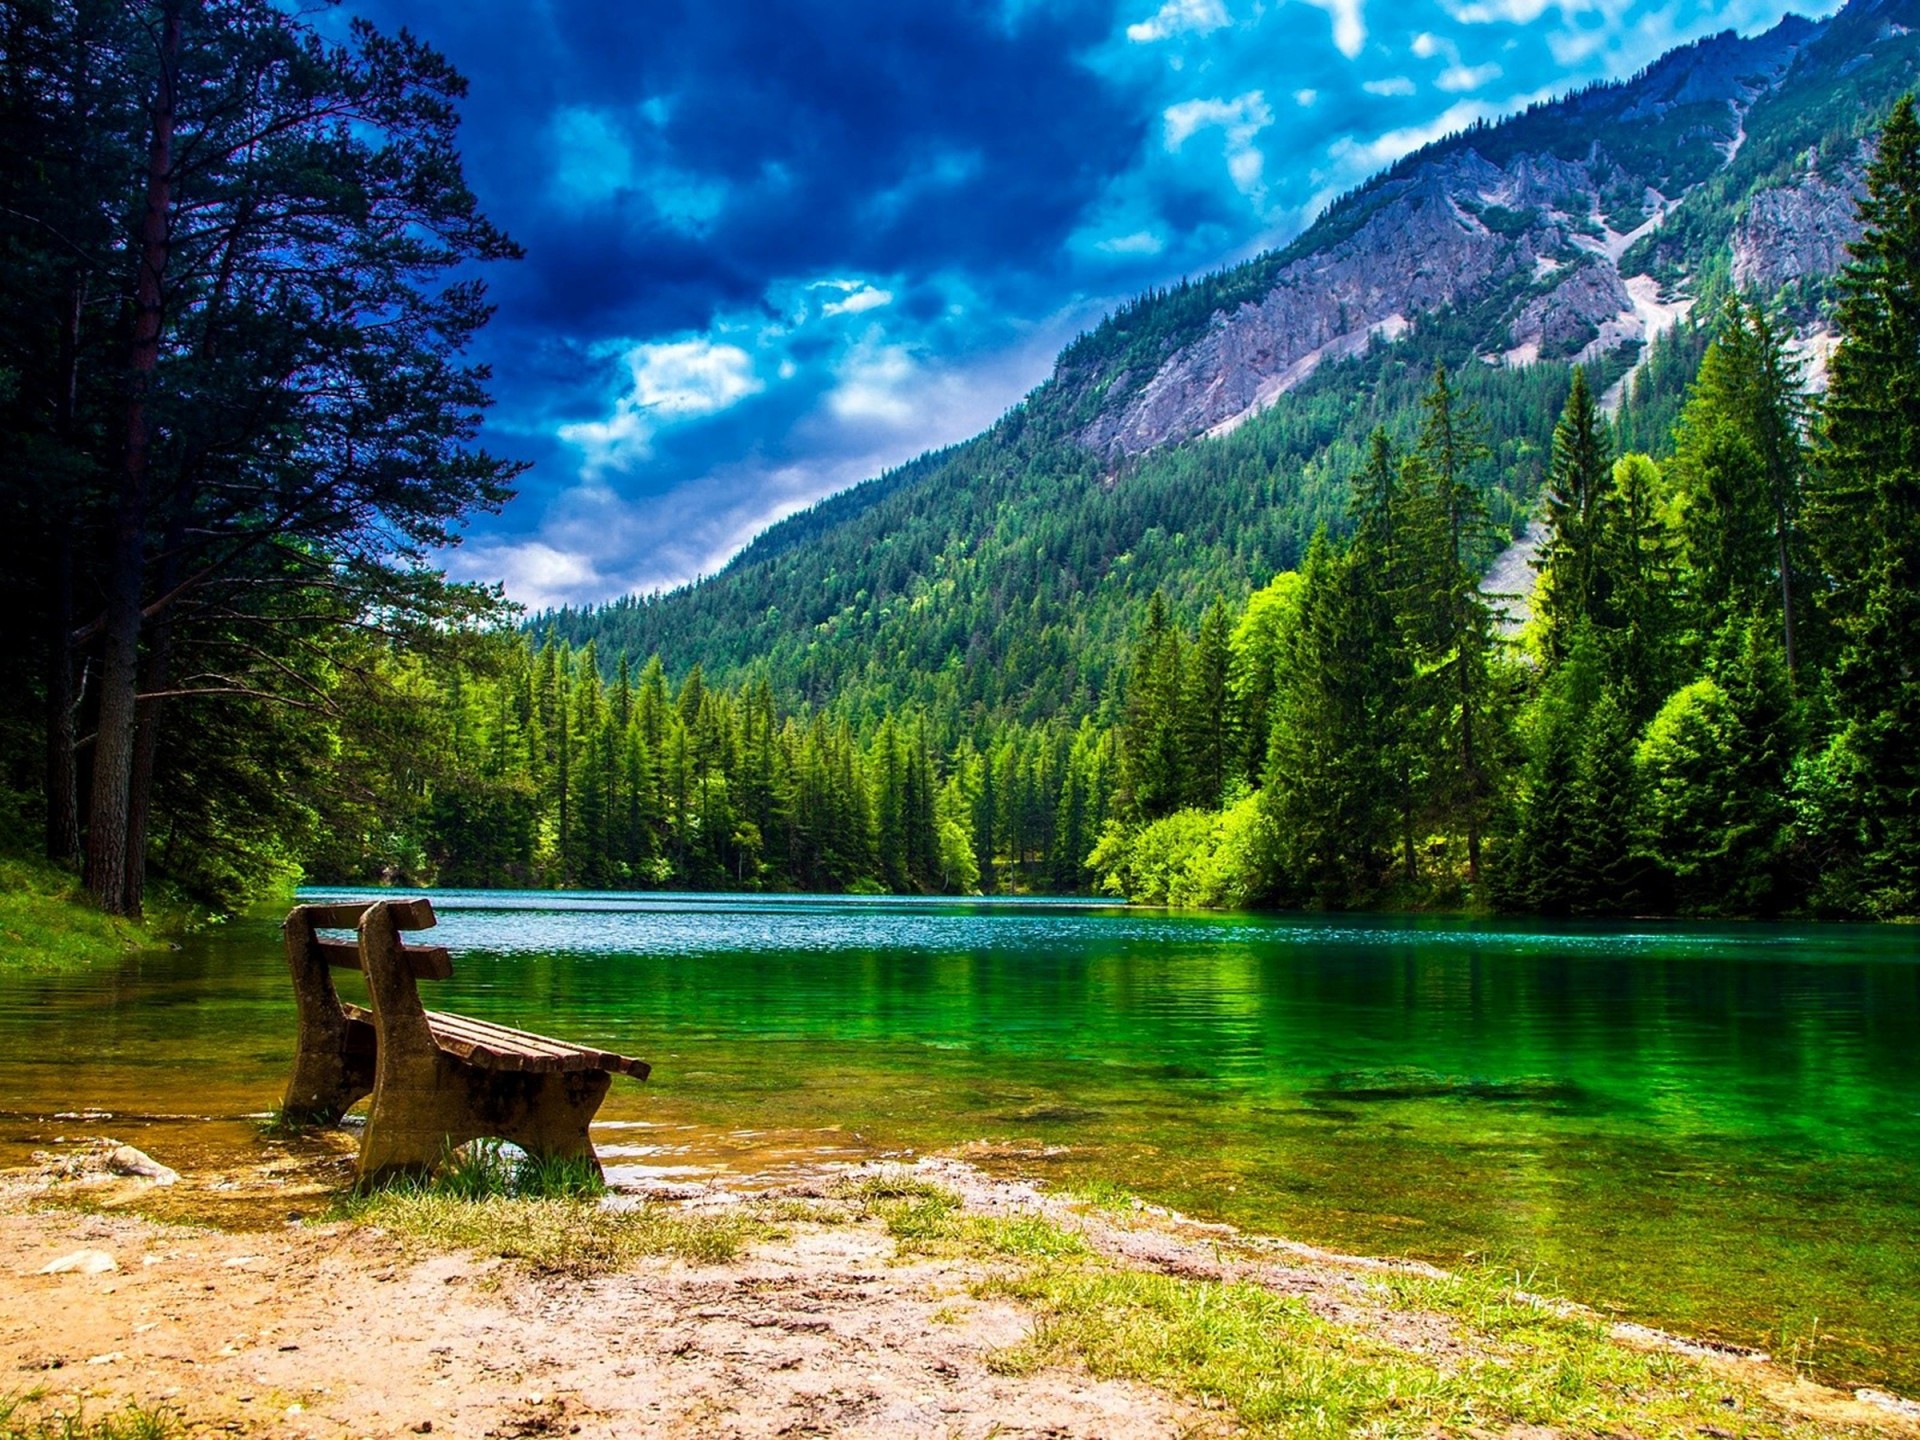 Green Forest With A Bench - HD Wallpaper 